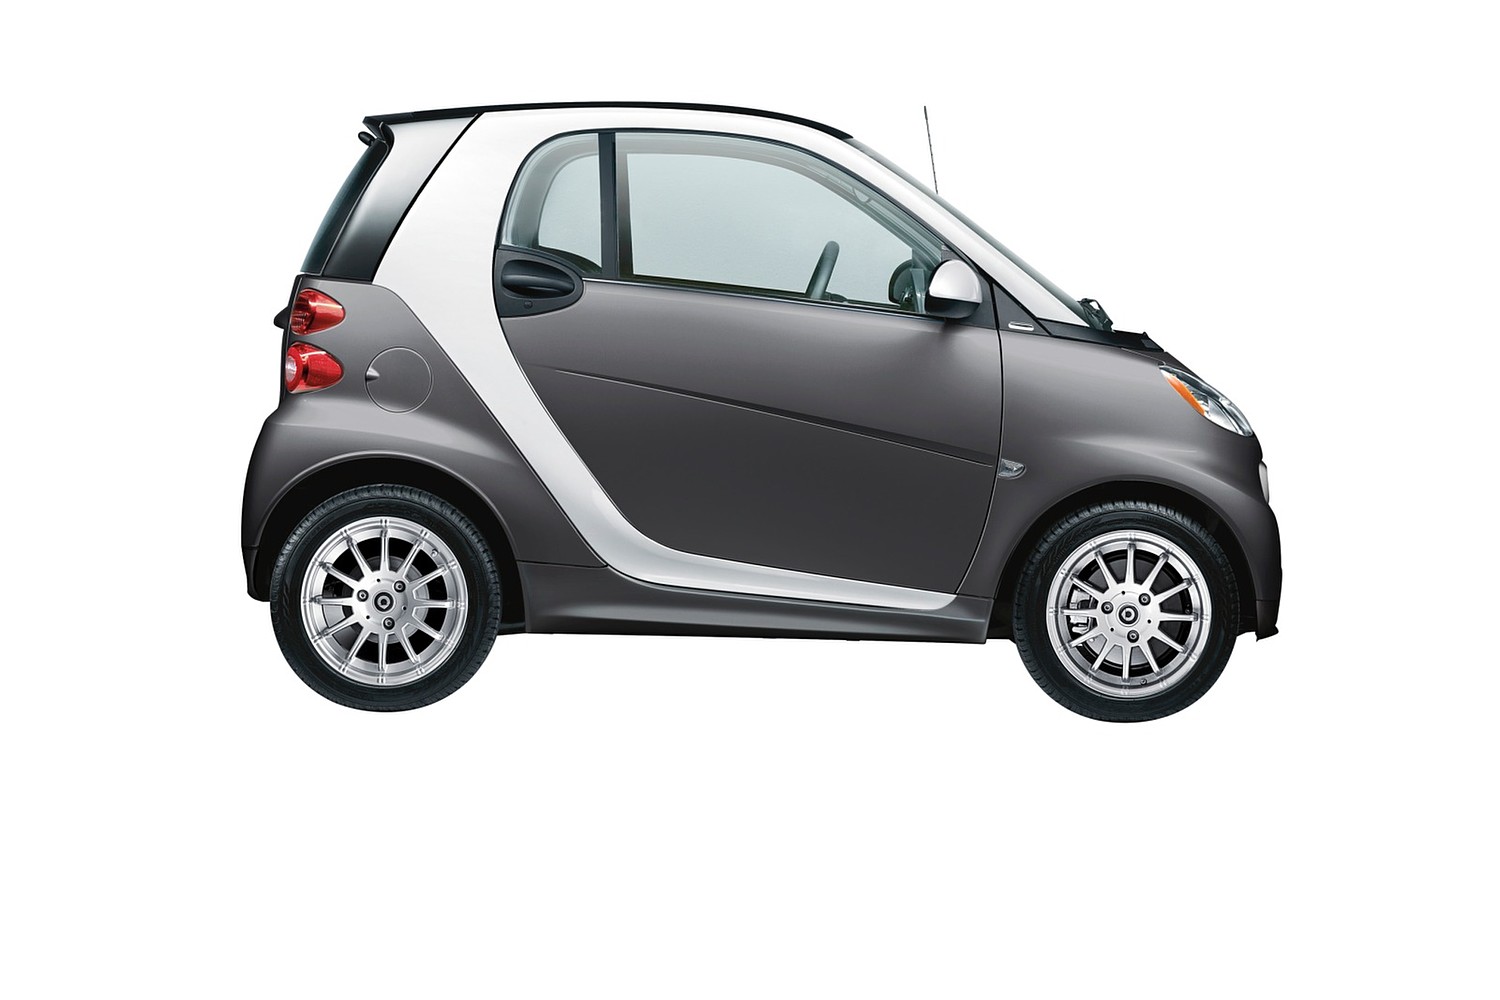 smart fortwo passion coupe 2dr Hatchback Exterior (2013 model year shown)